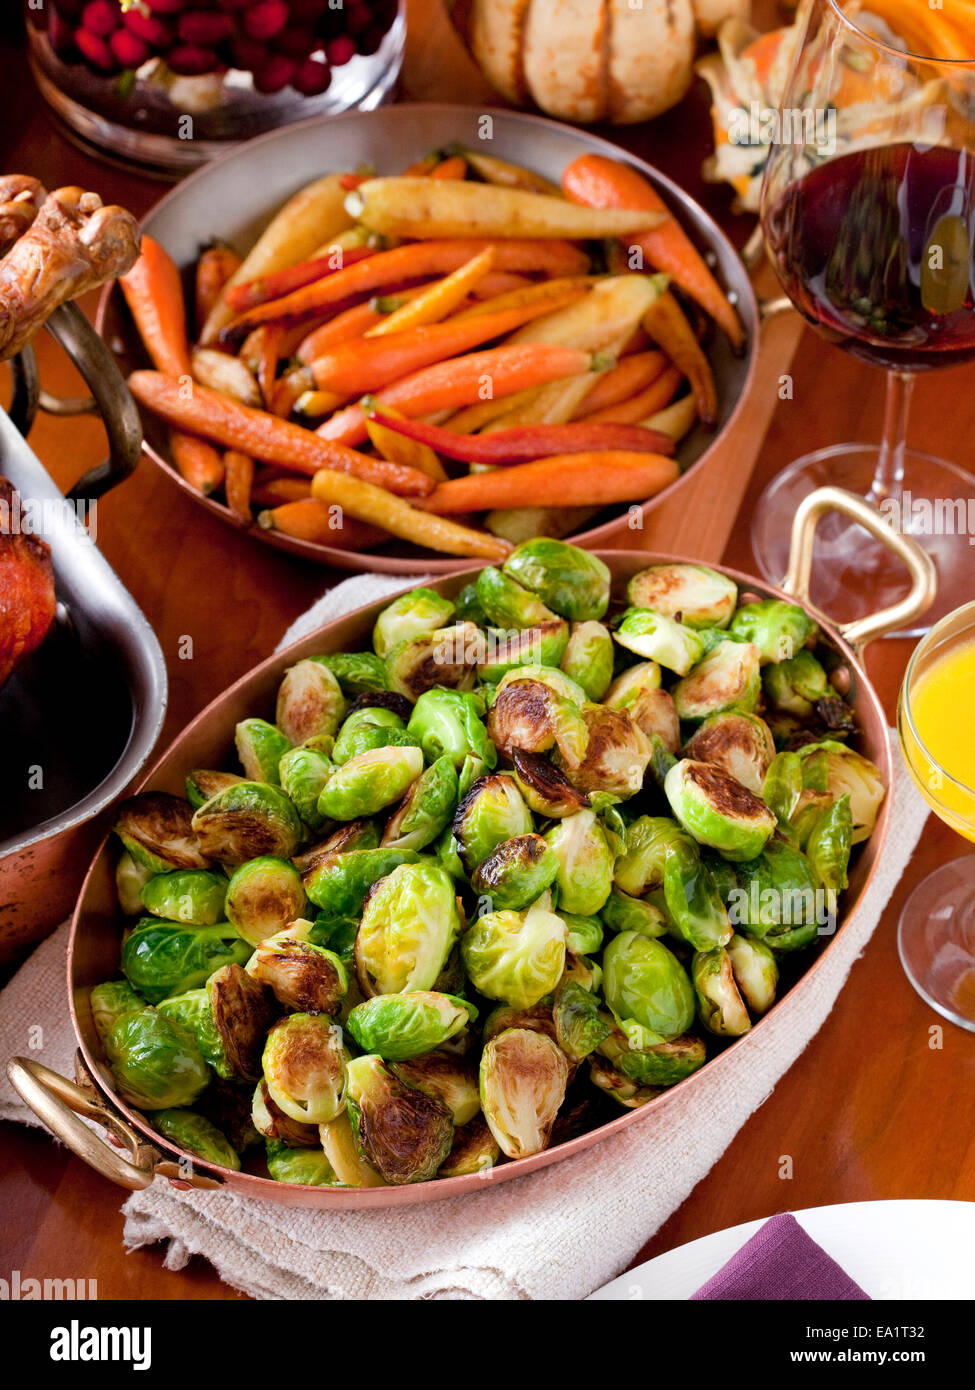 New York, NY.  Chef Tom Colicchio prepares a Thanksgiving meal, including Brussels Sprouts, at his restaraunt Kraft. Stock Photo